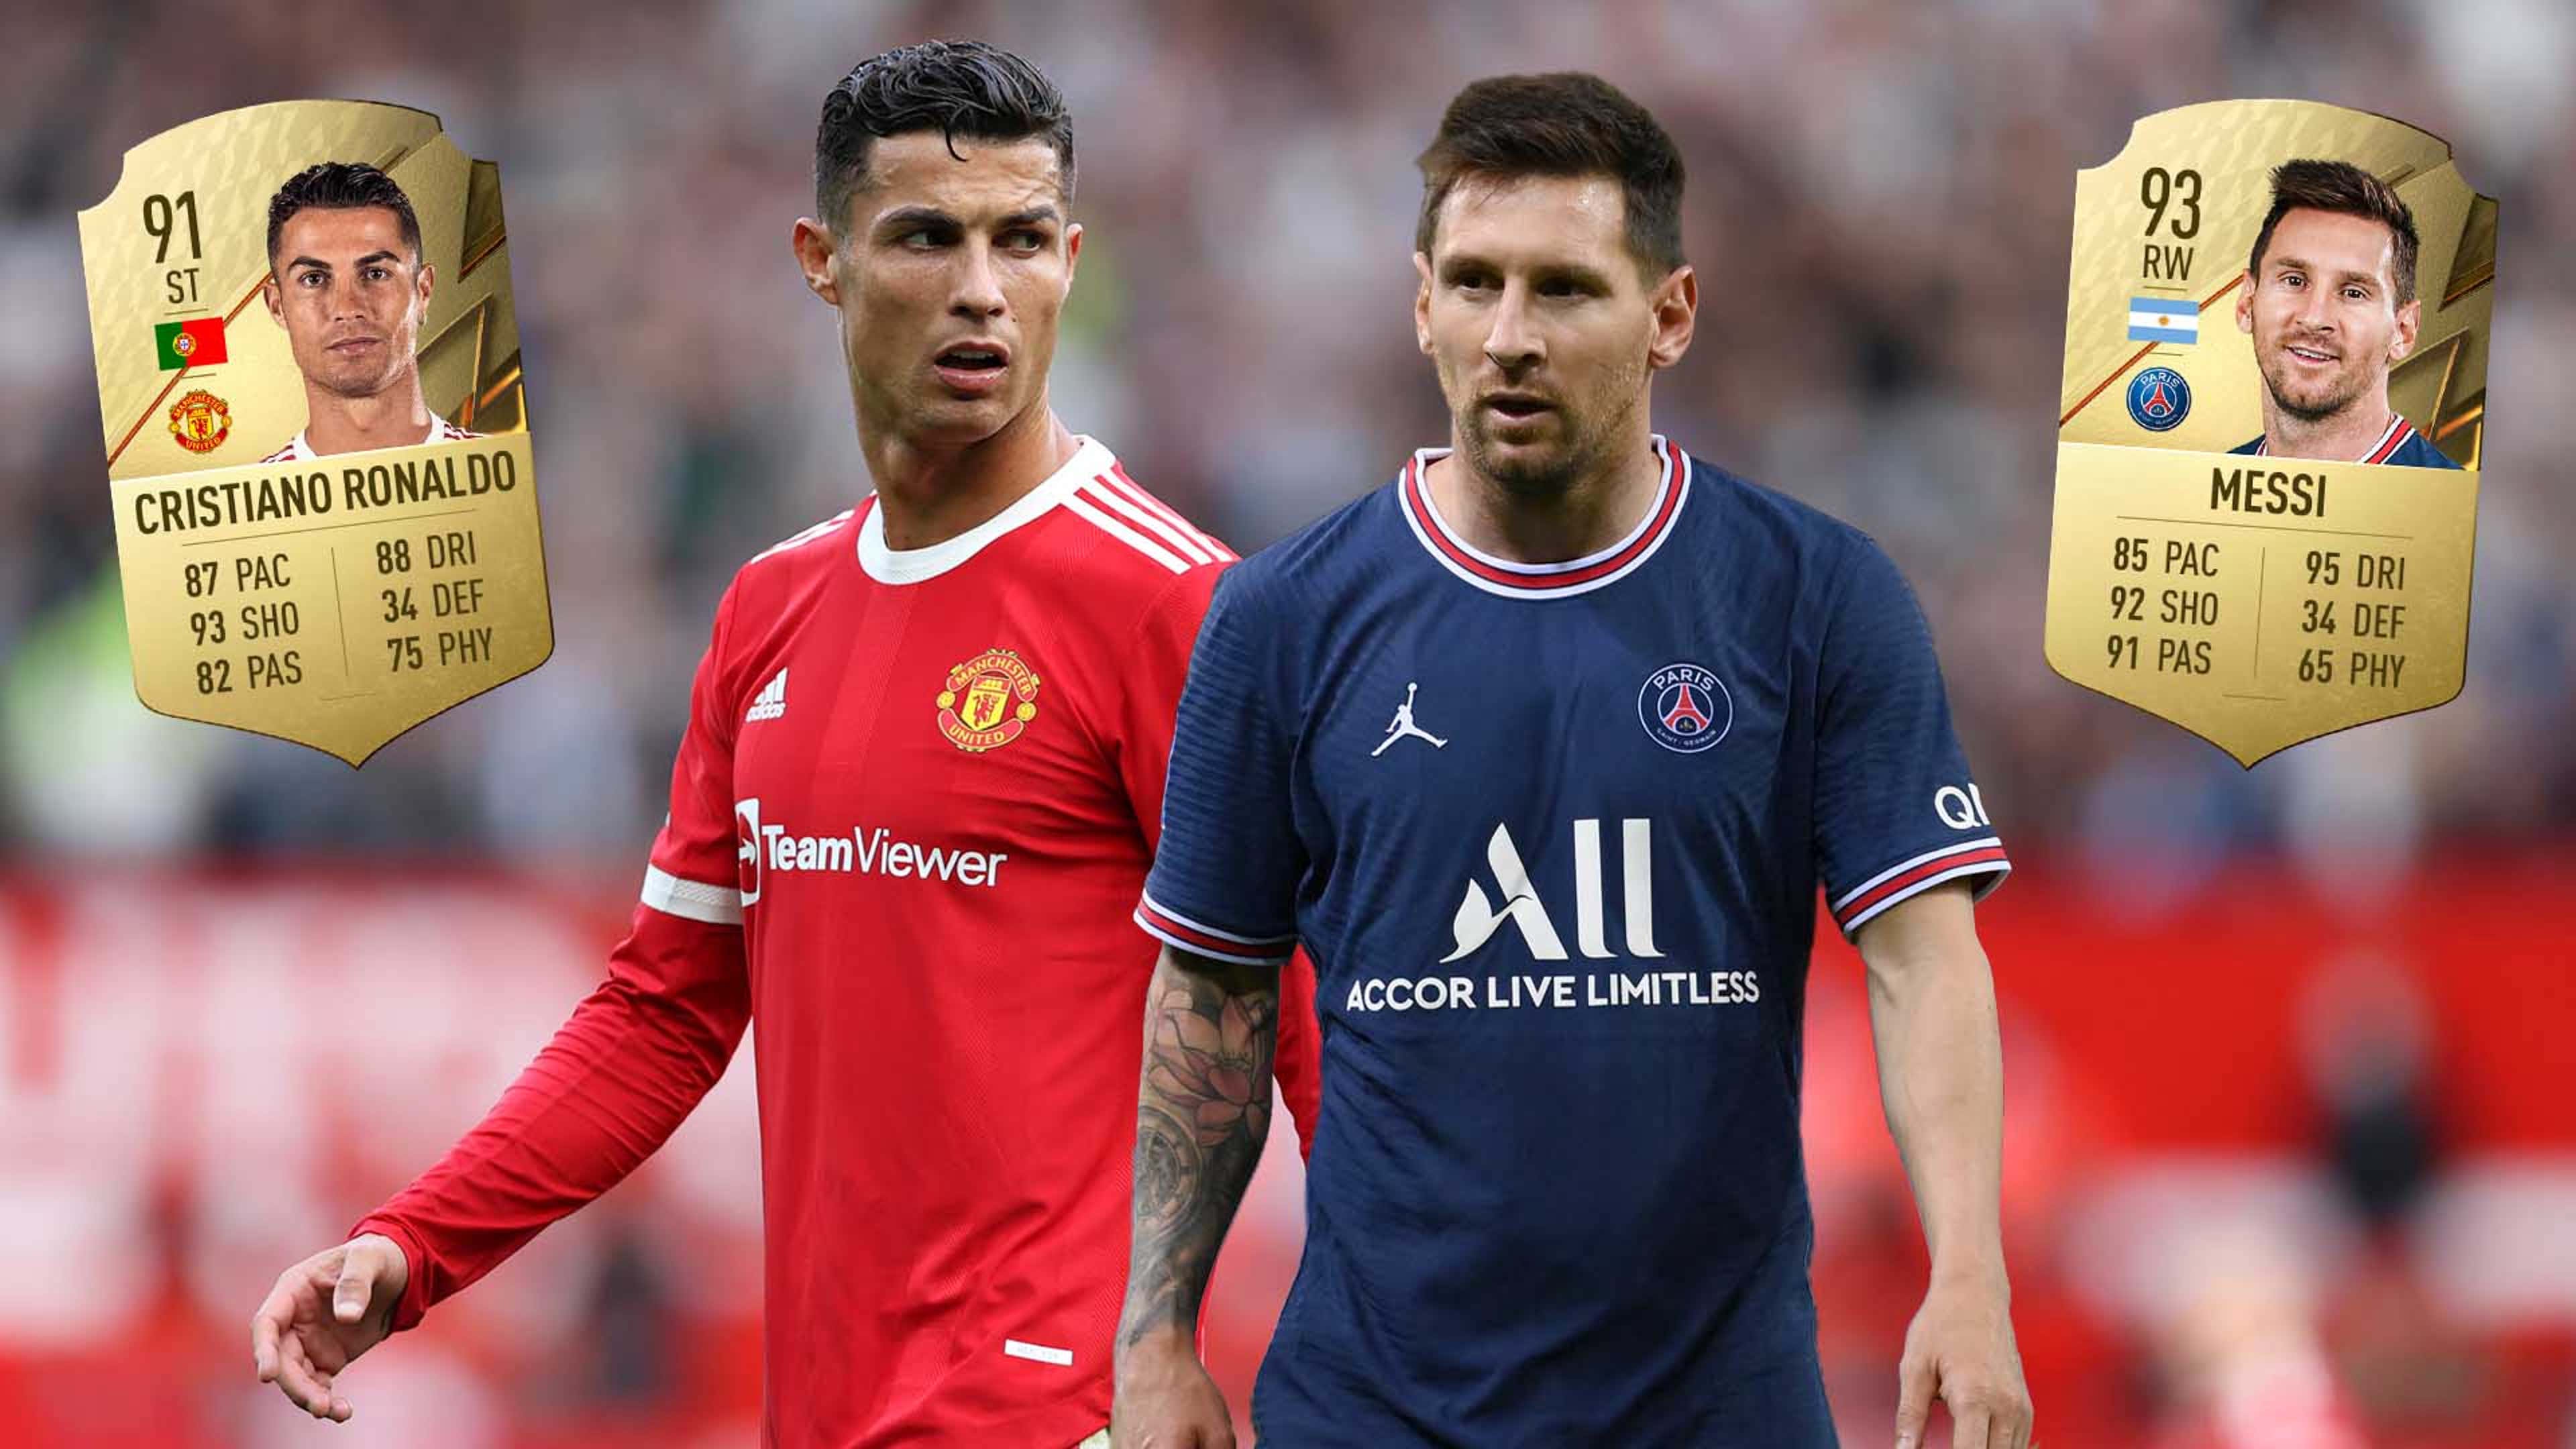 Cristiano Ronaldo and Lionel Messi Team Up for first ever joint